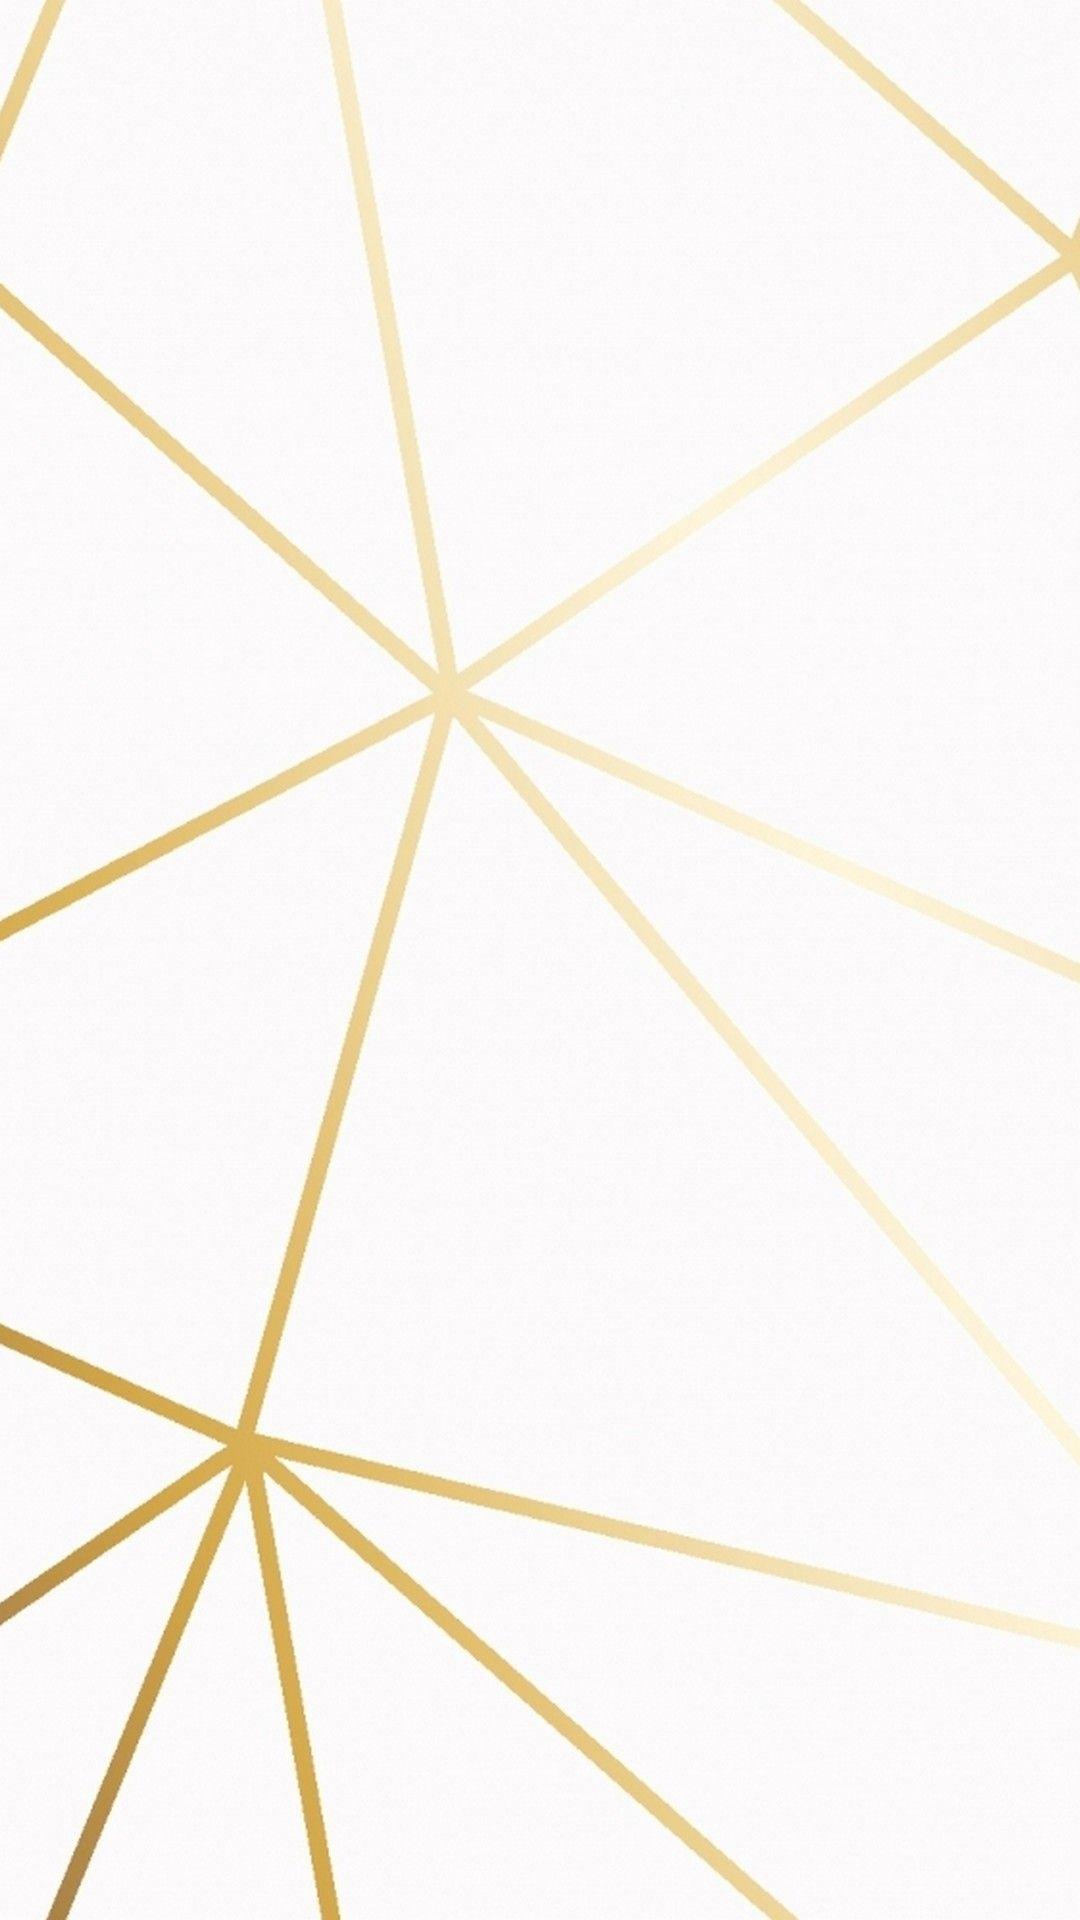 White and Gold iPhone Wallpaper. iPhoneWallpaper